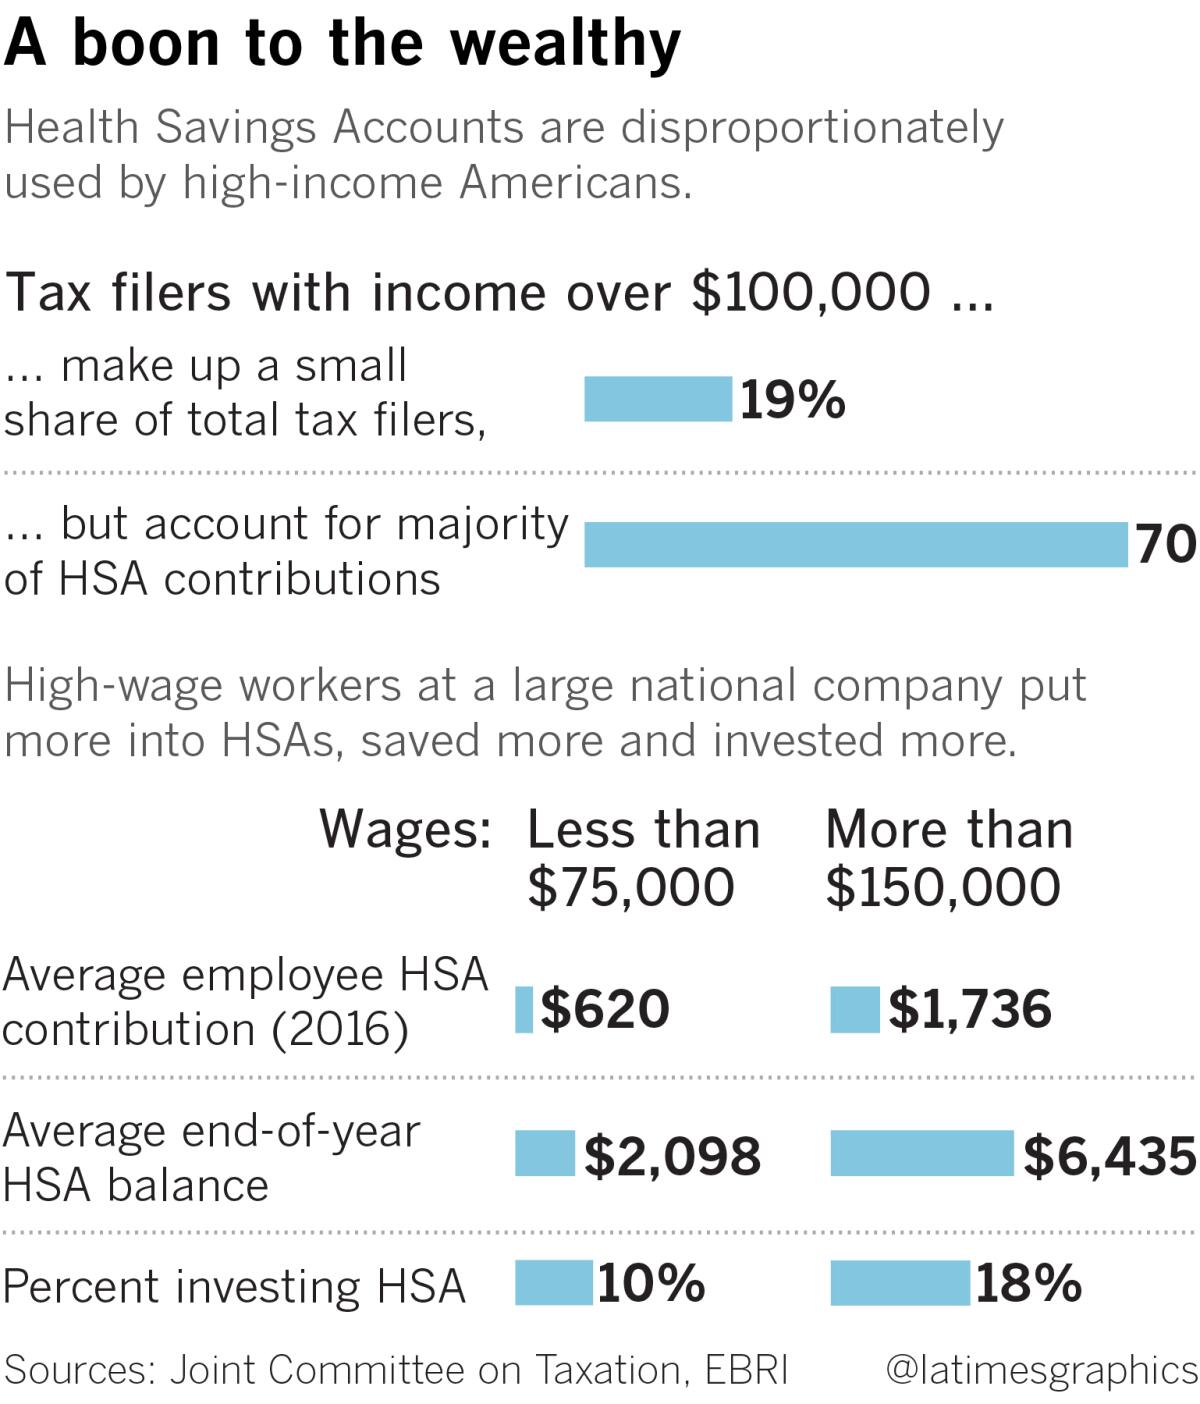 Graphic showing wealthy tax filers putting more money into HSAs